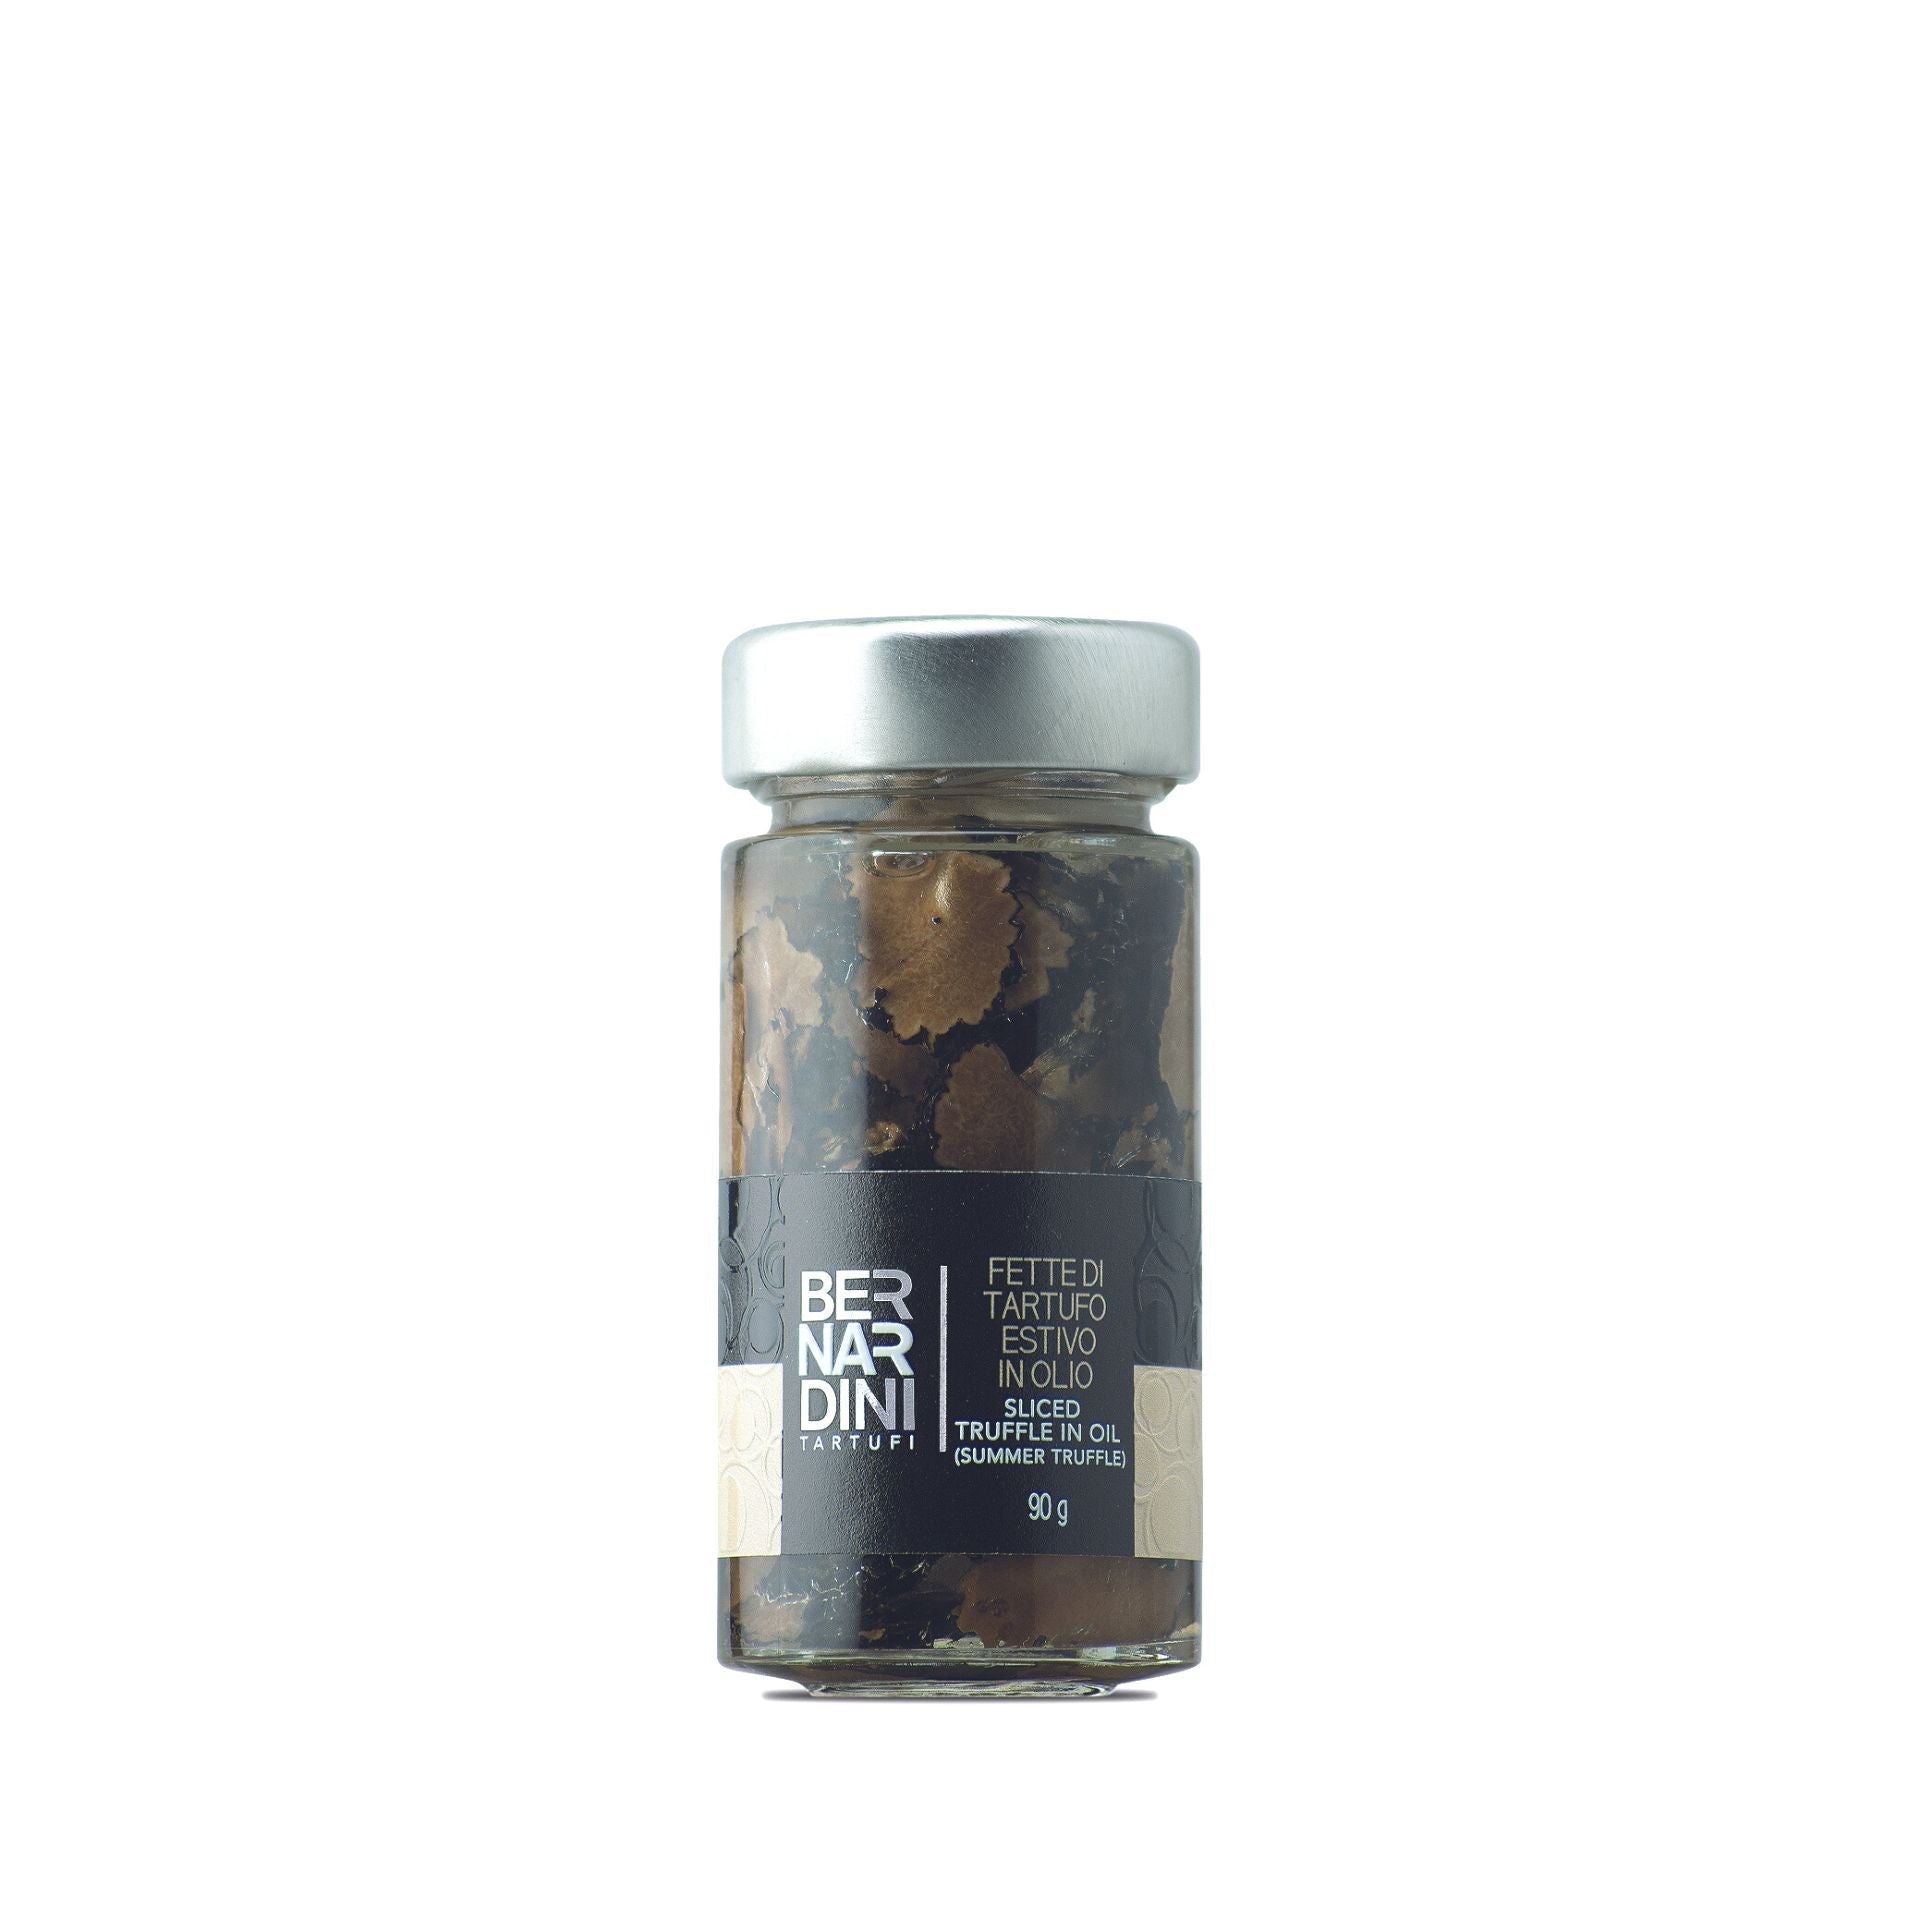 Bernardini Tartufi Sliced Truffle in Oil 90g  | Imported and distributed in the UK by Just Gourmet Foods